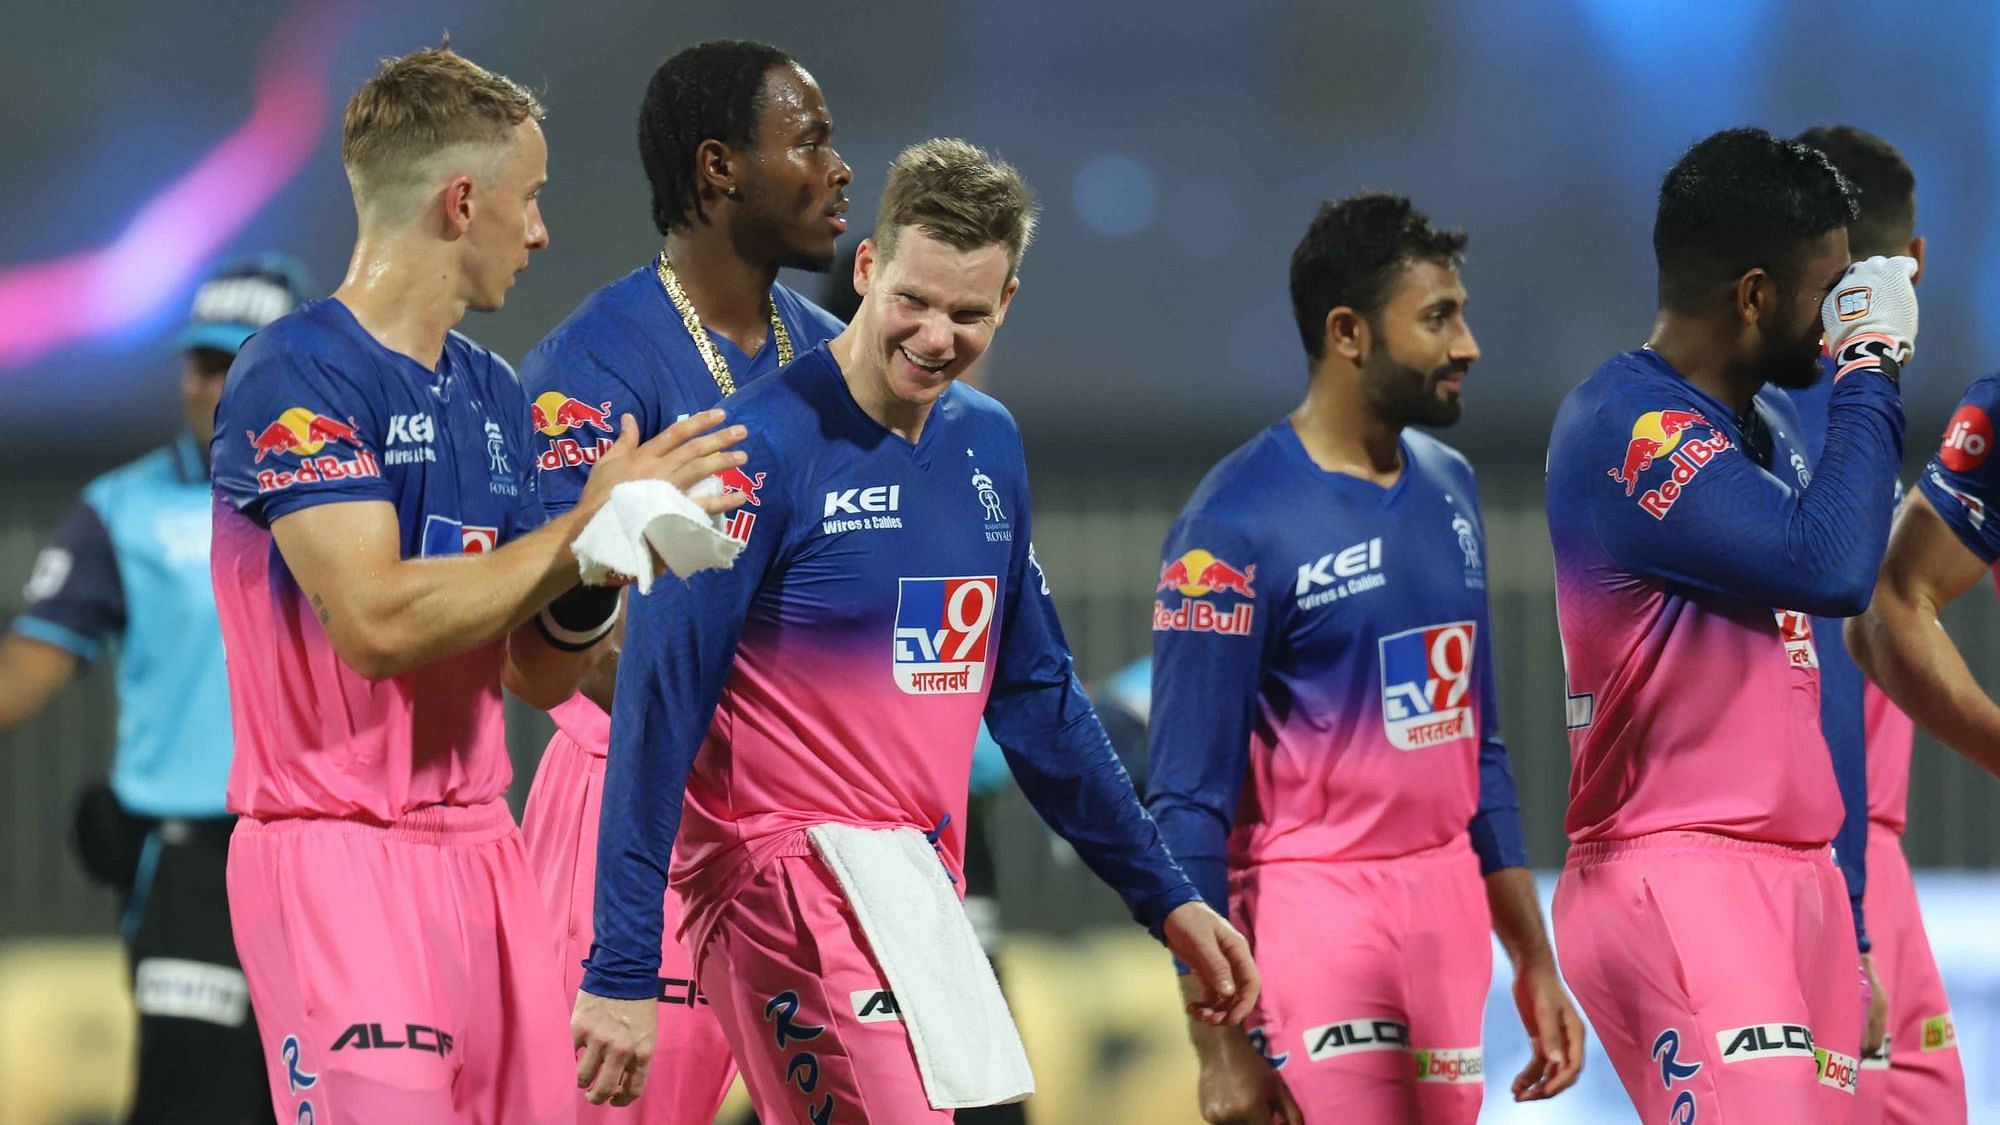 Rajasthan Royals started their Indian Premier League campaign with a win against Chennai Super Kings.